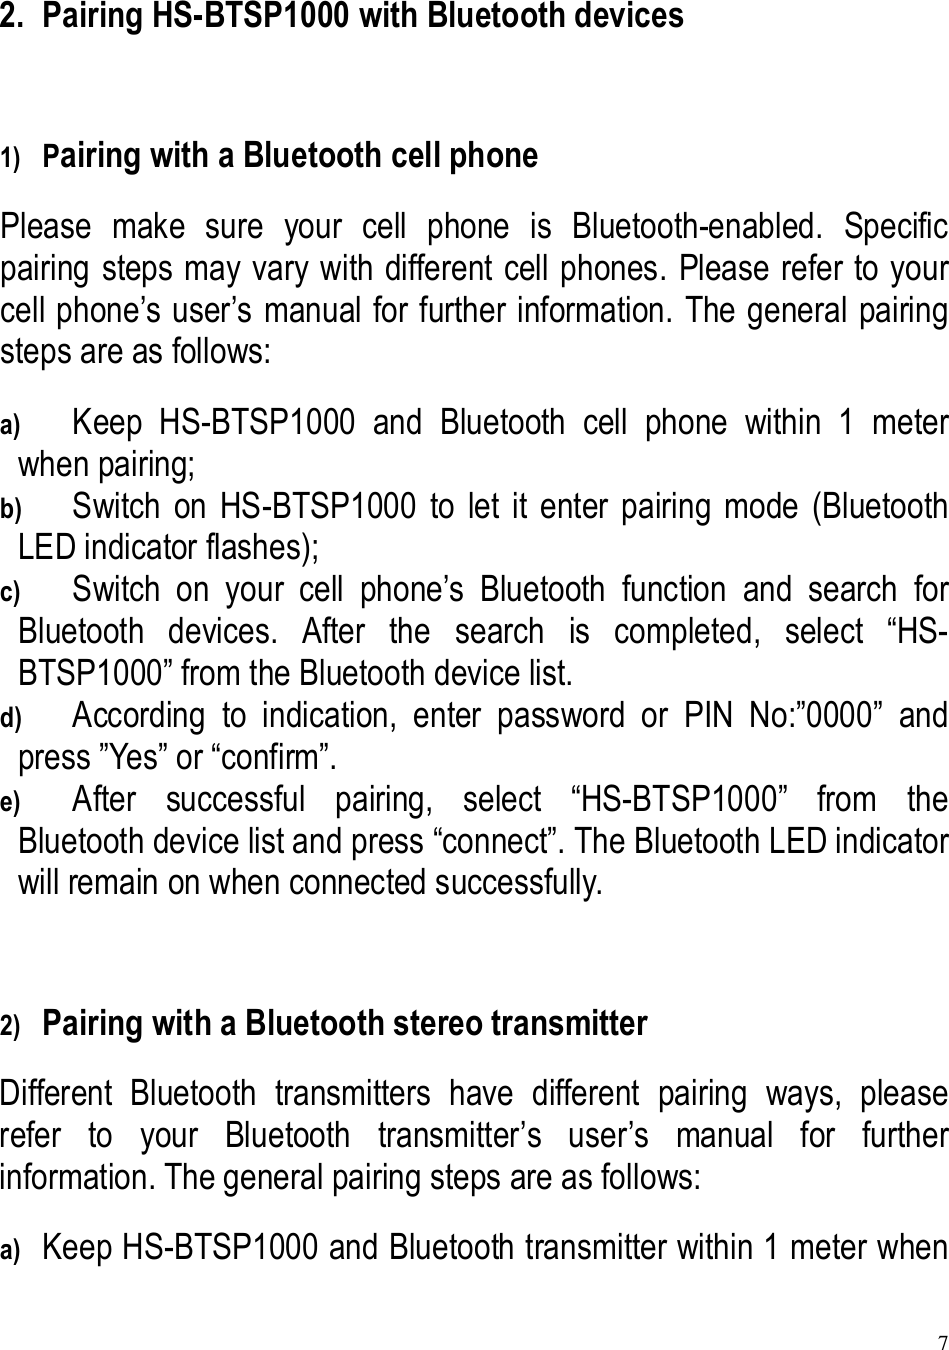 7  2. Pairing HS-BTSP1000 with Bluetooth devices  1) Pairing with a Bluetooth cell phone Please  make  sure  your  cell  phone  is  Bluetooth-enabled.  Specific pairing steps may vary with different cell phones. Please refer to your cell phone’s user’s manual for further information. The general pairing steps are as follows: a) Keep  HS-BTSP1000  and  Bluetooth  cell  phone  within  1  meter when pairing; b) Switch  on  HS-BTSP1000  to  let  it  enter  pairing  mode  (Bluetooth LED indicator flashes); c) Switch  on  your  cell  phone’s  Bluetooth  function  and  search  for Bluetooth  devices.  After  the  search  is  completed,  select  “HS-BTSP1000” from the Bluetooth device list. d) According  to  indication,  enter  password  or  PIN  No:”0000”  and press ”Yes” or “confirm”. e) After  successful  pairing,  select  “HS-BTSP1000”  from  the Bluetooth device list and press “connect”. The Bluetooth LED indicator will remain on when connected successfully.  2) Pairing with a Bluetooth stereo transmitter Different  Bluetooth  transmitters  have  different  pairing  ways,  please refer  to  your  Bluetooth  transmitter’s  user’s  manual  for  further information. The general pairing steps are as follows: a) Keep HS-BTSP1000 and Bluetooth transmitter within 1 meter when 